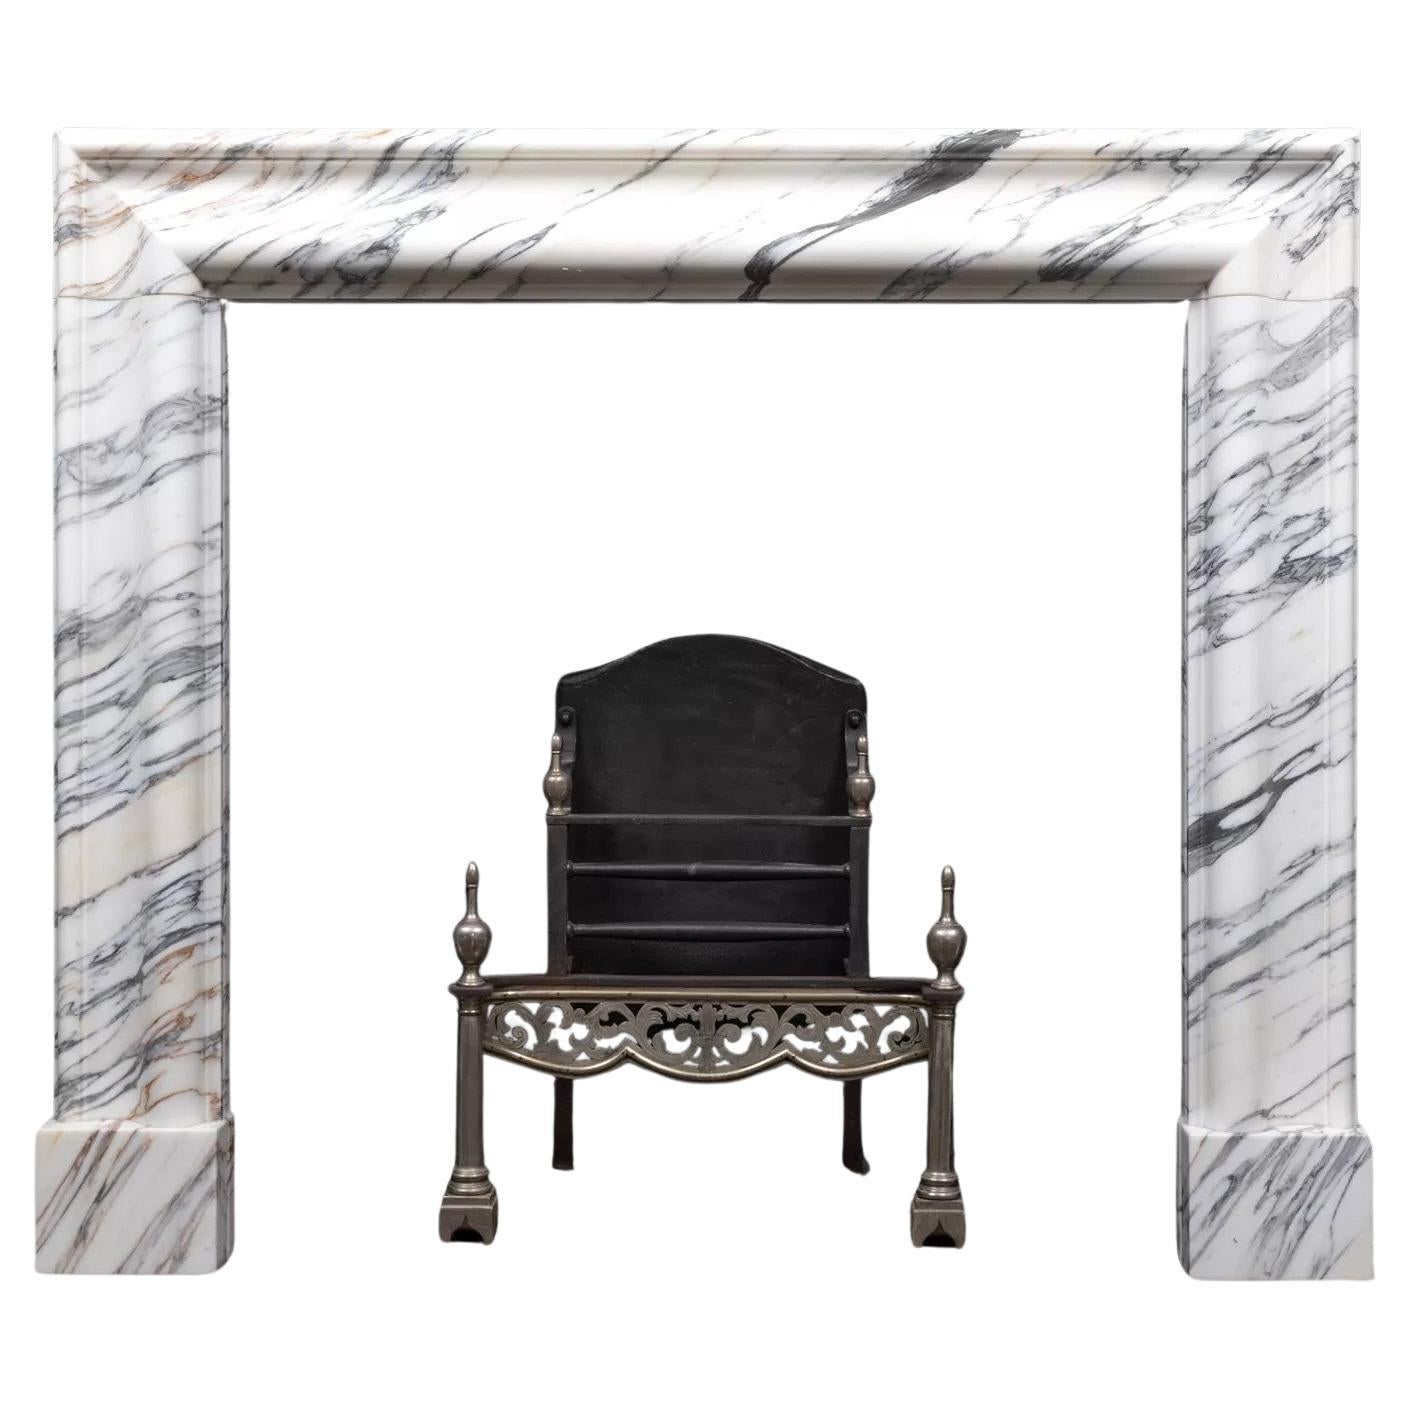 A arabescato marble bolection mantel by Ryan & Smith For Sale